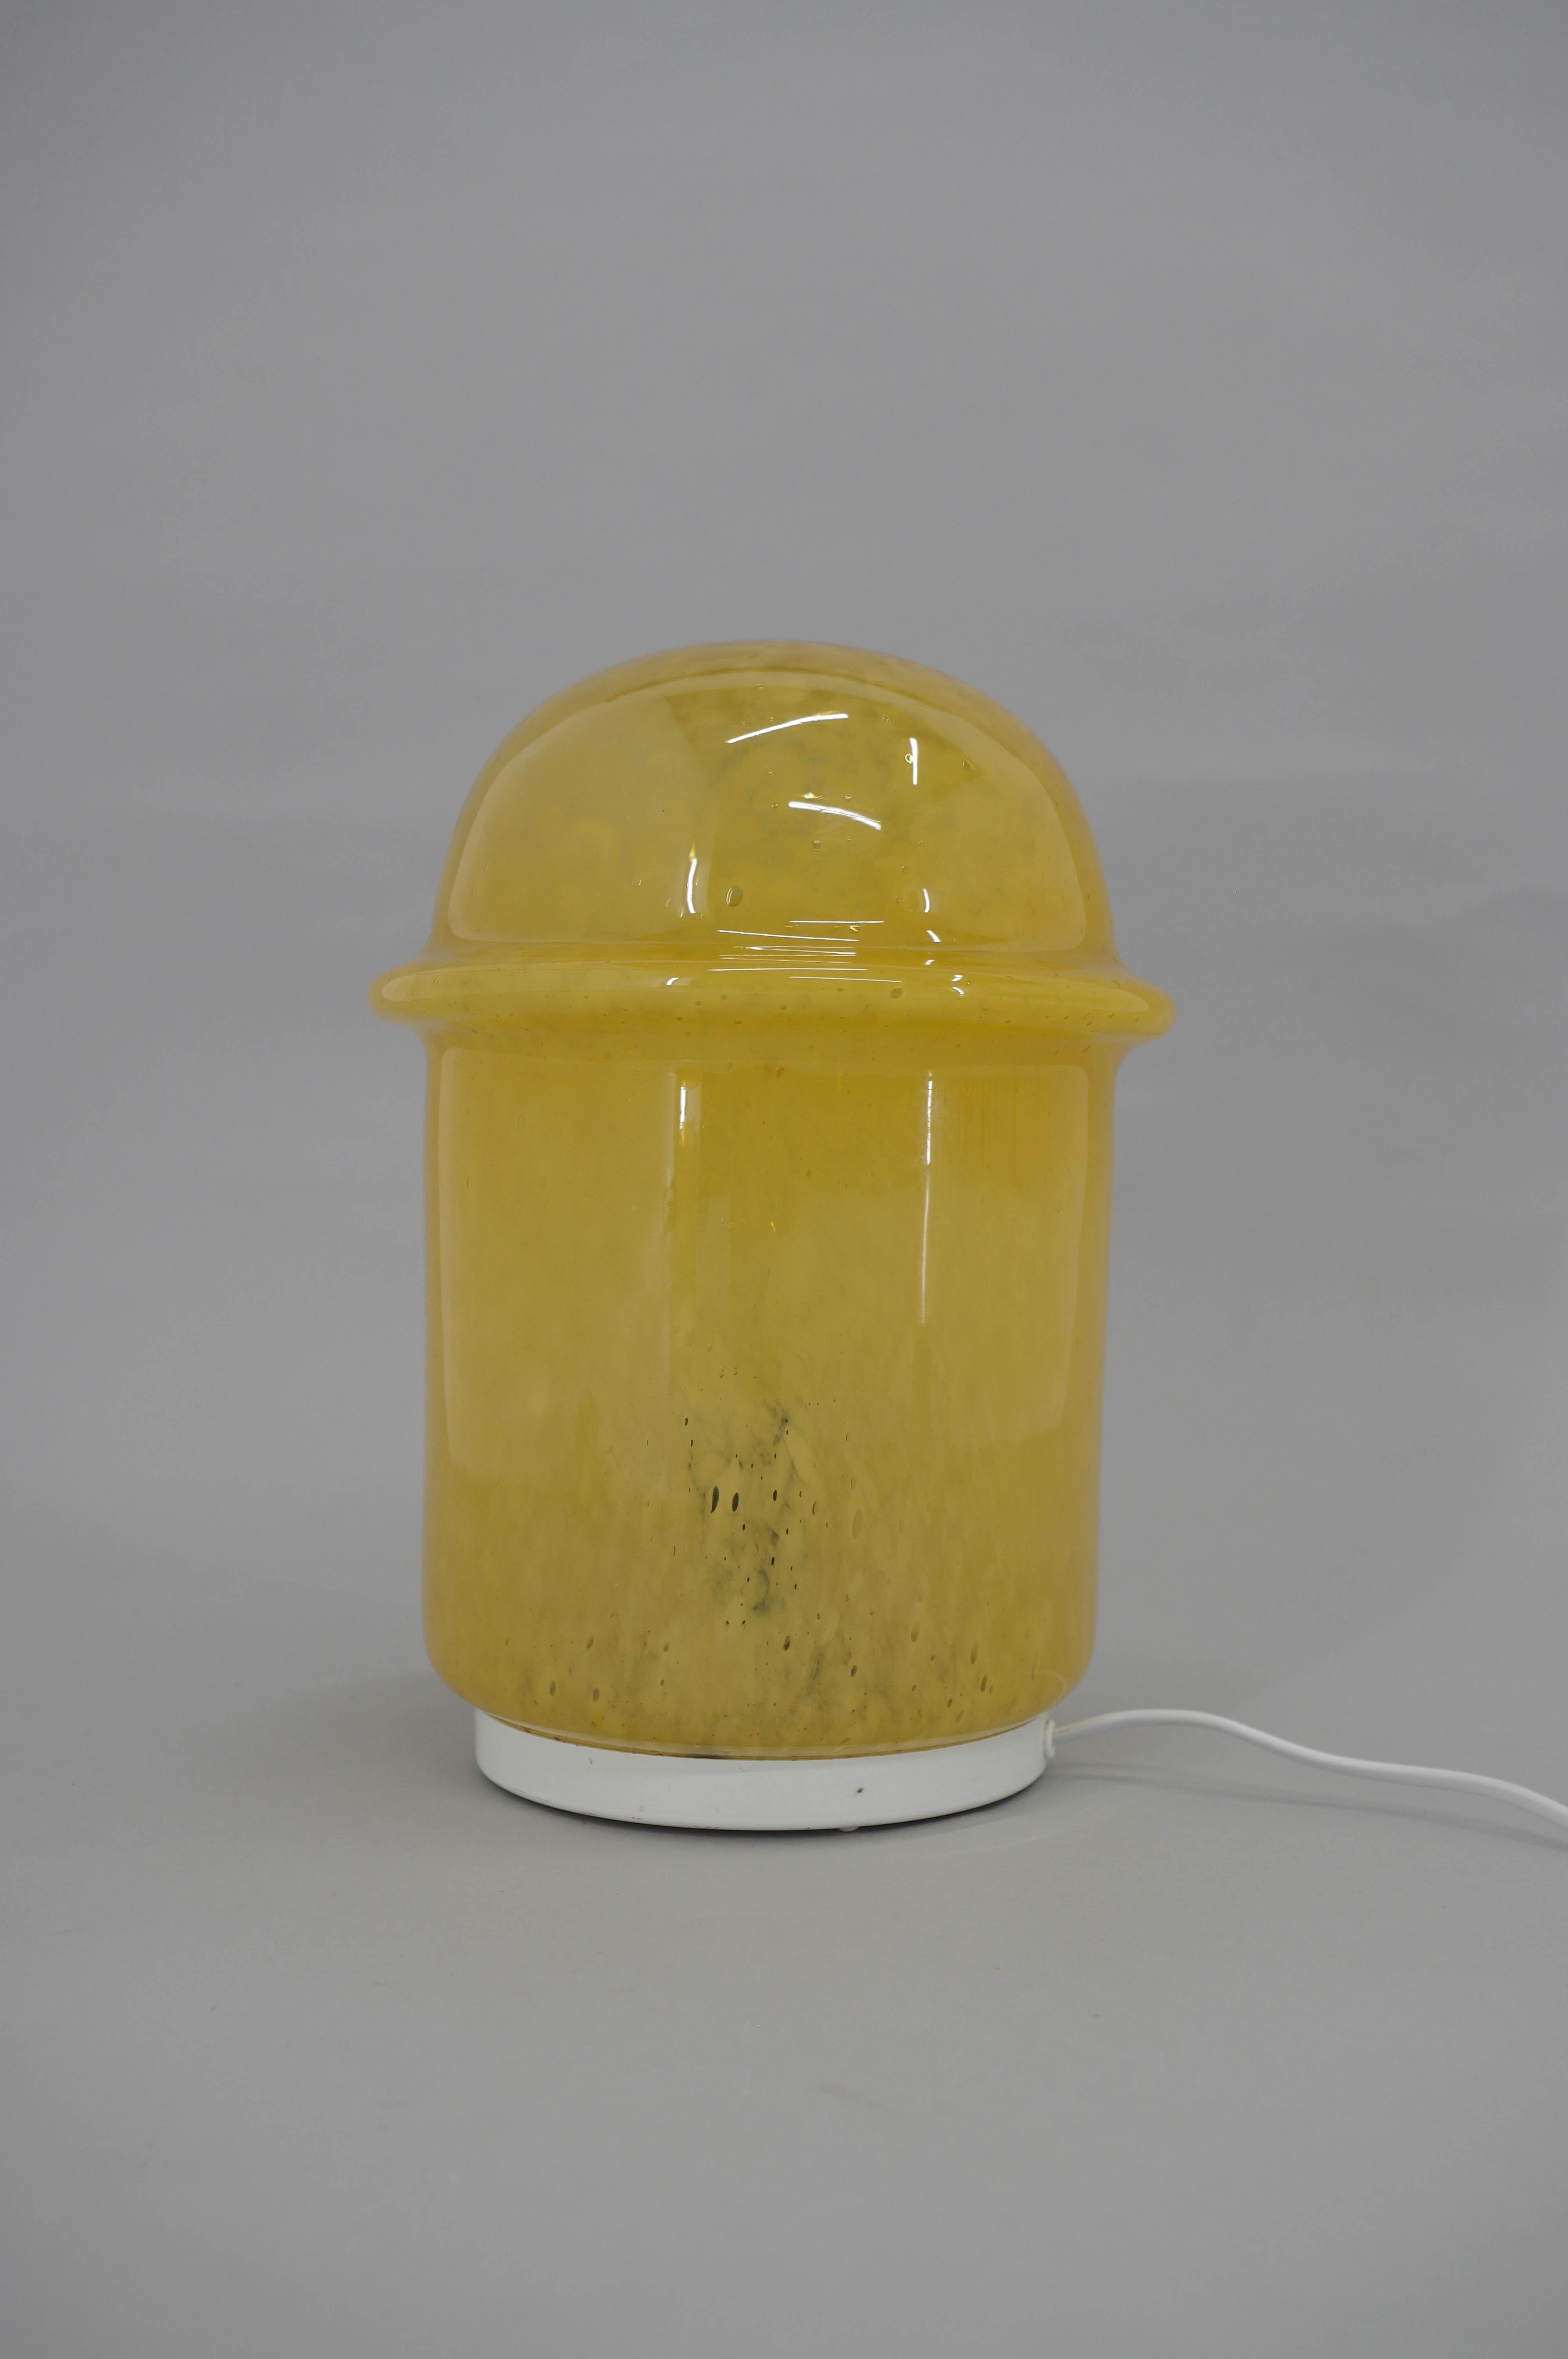 Space Age yellow glass table or floor lamp made in Czechoslovakia in 1970s. Perfect original condition.
1x75W, E25-E27 bulb
US plug adapter included